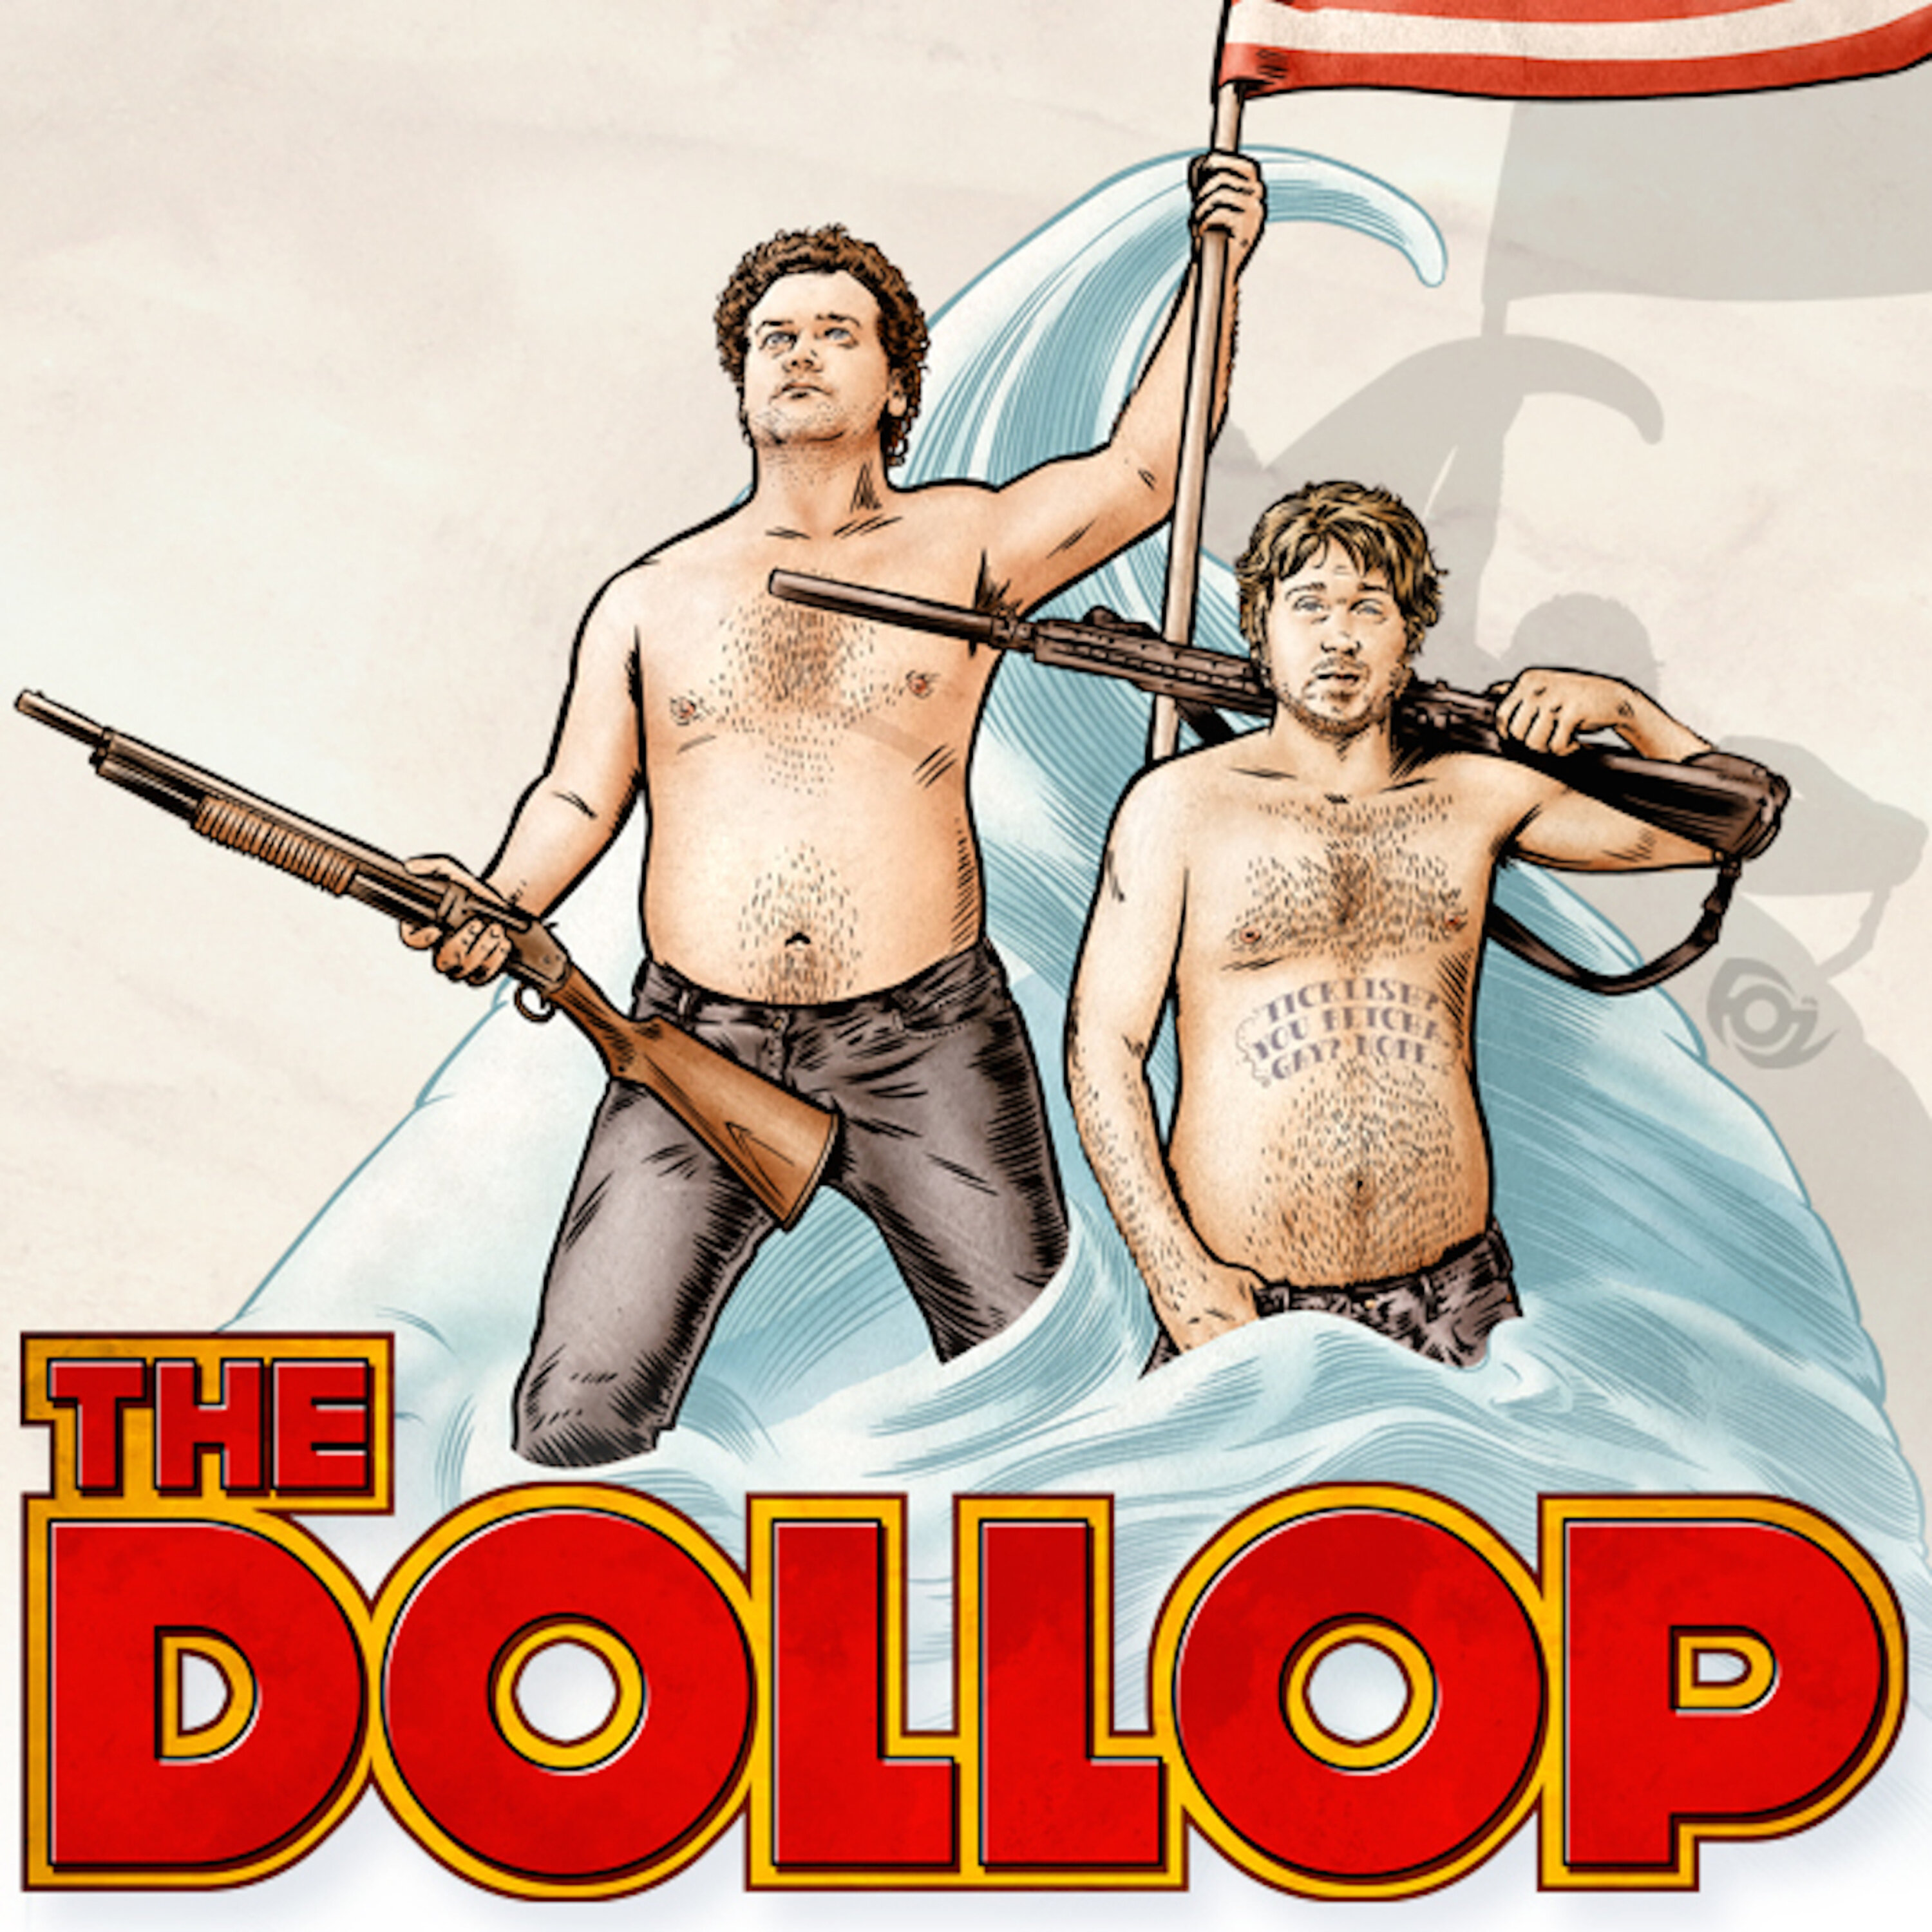 The Dollop with Dave Anthony and Gareth Reynolds:All Things Comedy